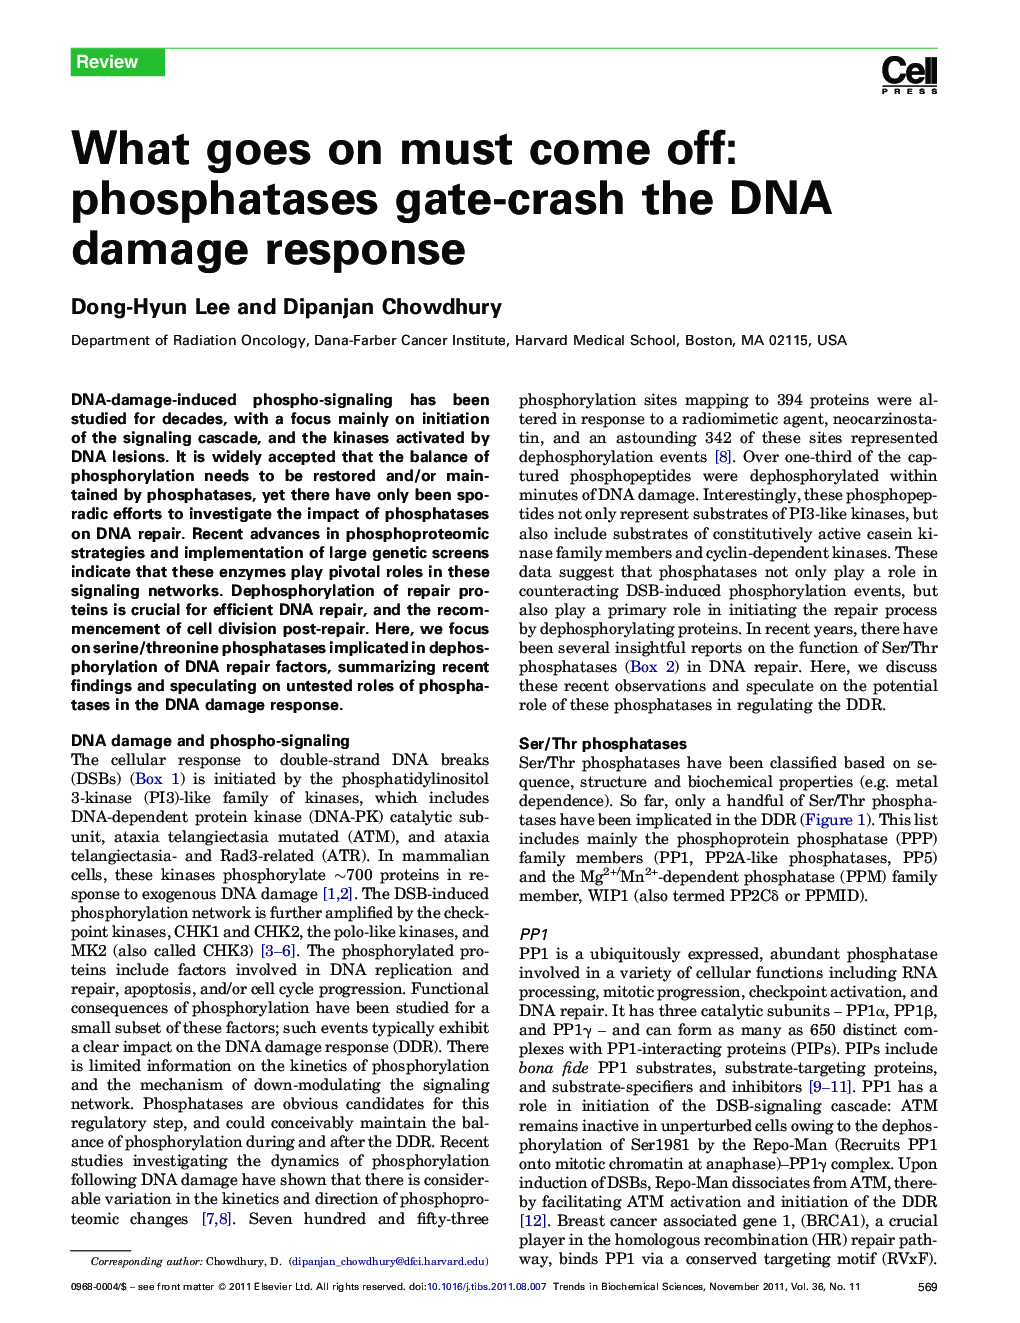 What goes on must come off: phosphatases gate-crash the DNA damage response